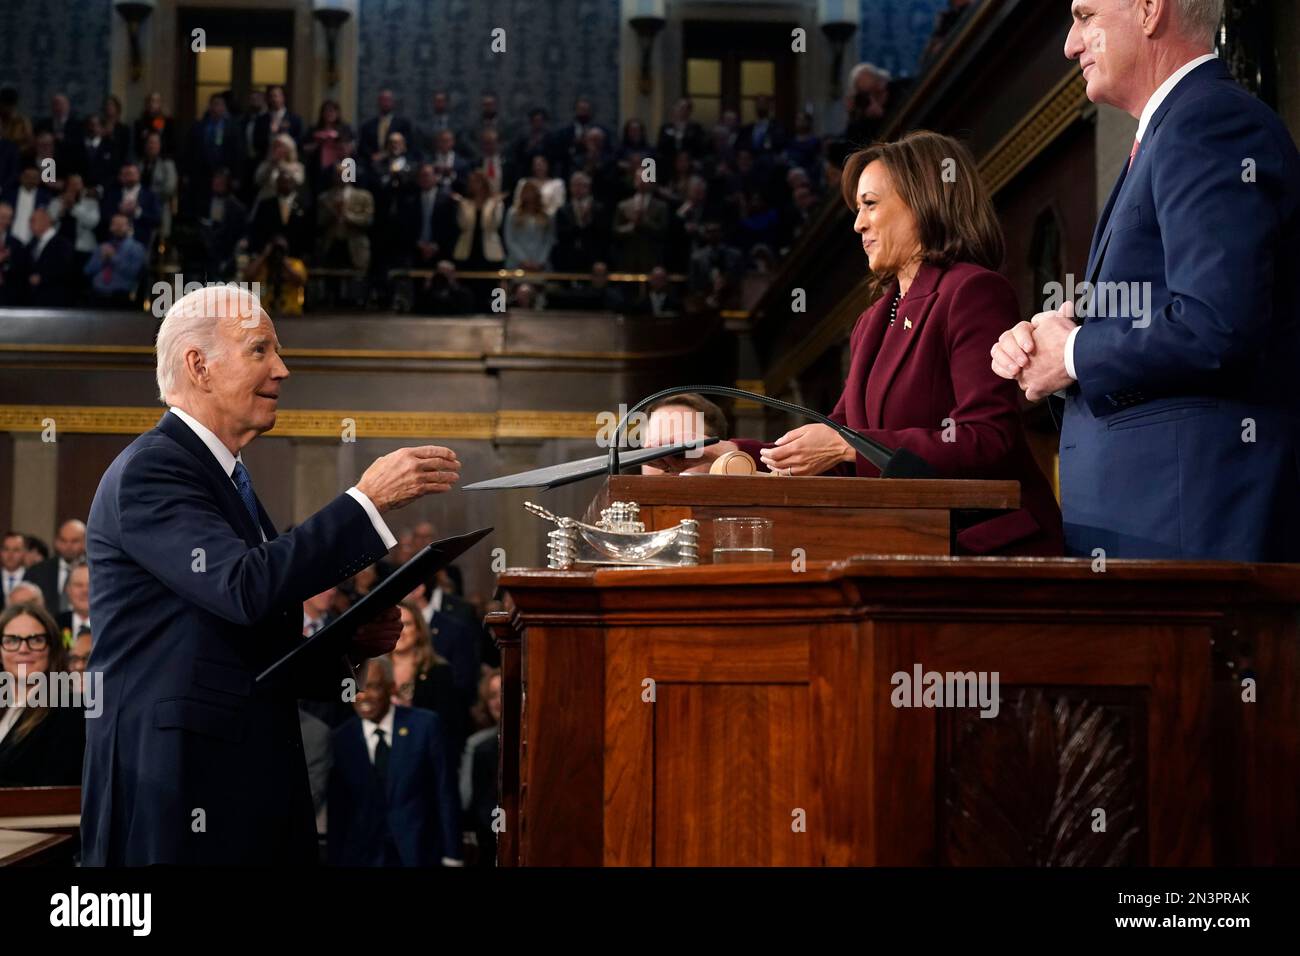 Washington. 7th Feb, 2023. President Joe Biden hands copies of his speech to Vice President Kamala Harris and House Speaker Kevin McCarthy of Calif., at the State of the Union address to a joint session of Congress at the Capitol, Tuesday, Feb. 7, 2023, in Washington. Credit: Jacqueline Martin/Pool via CNP/dpa/Alamy Live News Stock Photo